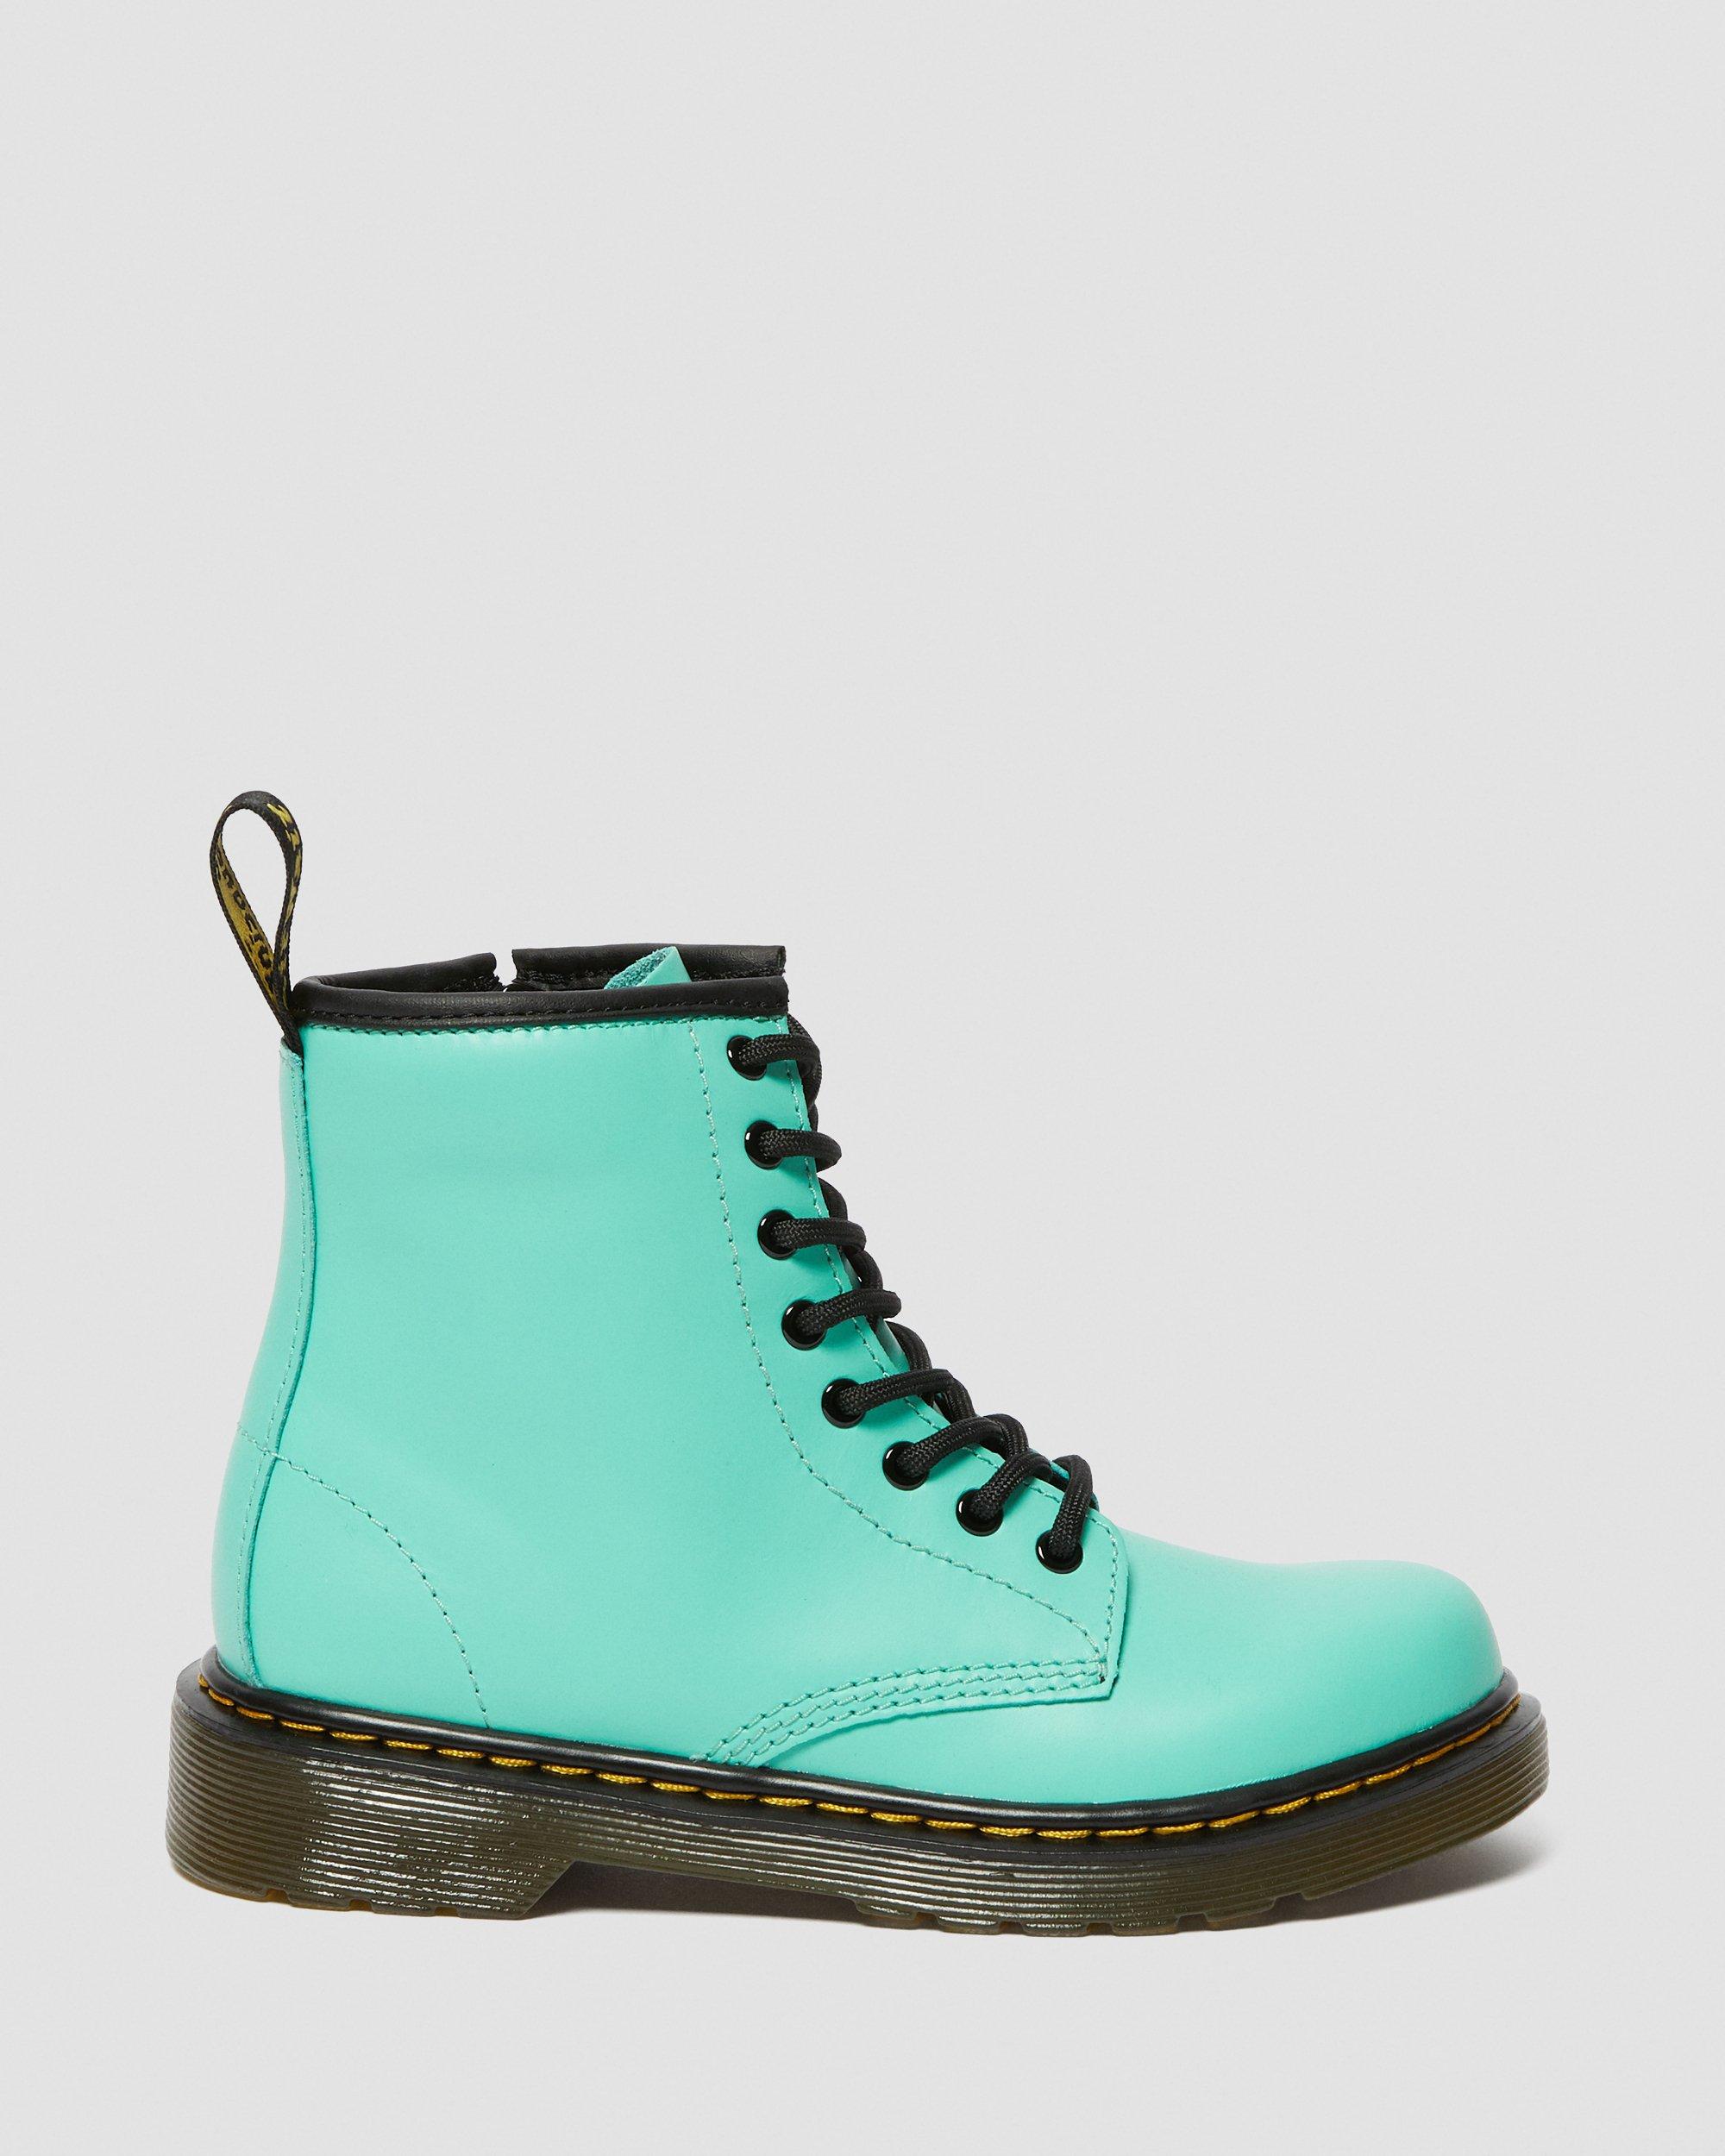 Junior 1460 Muted Leather Lace Up Boots in Peppermint Green | Dr. Martens